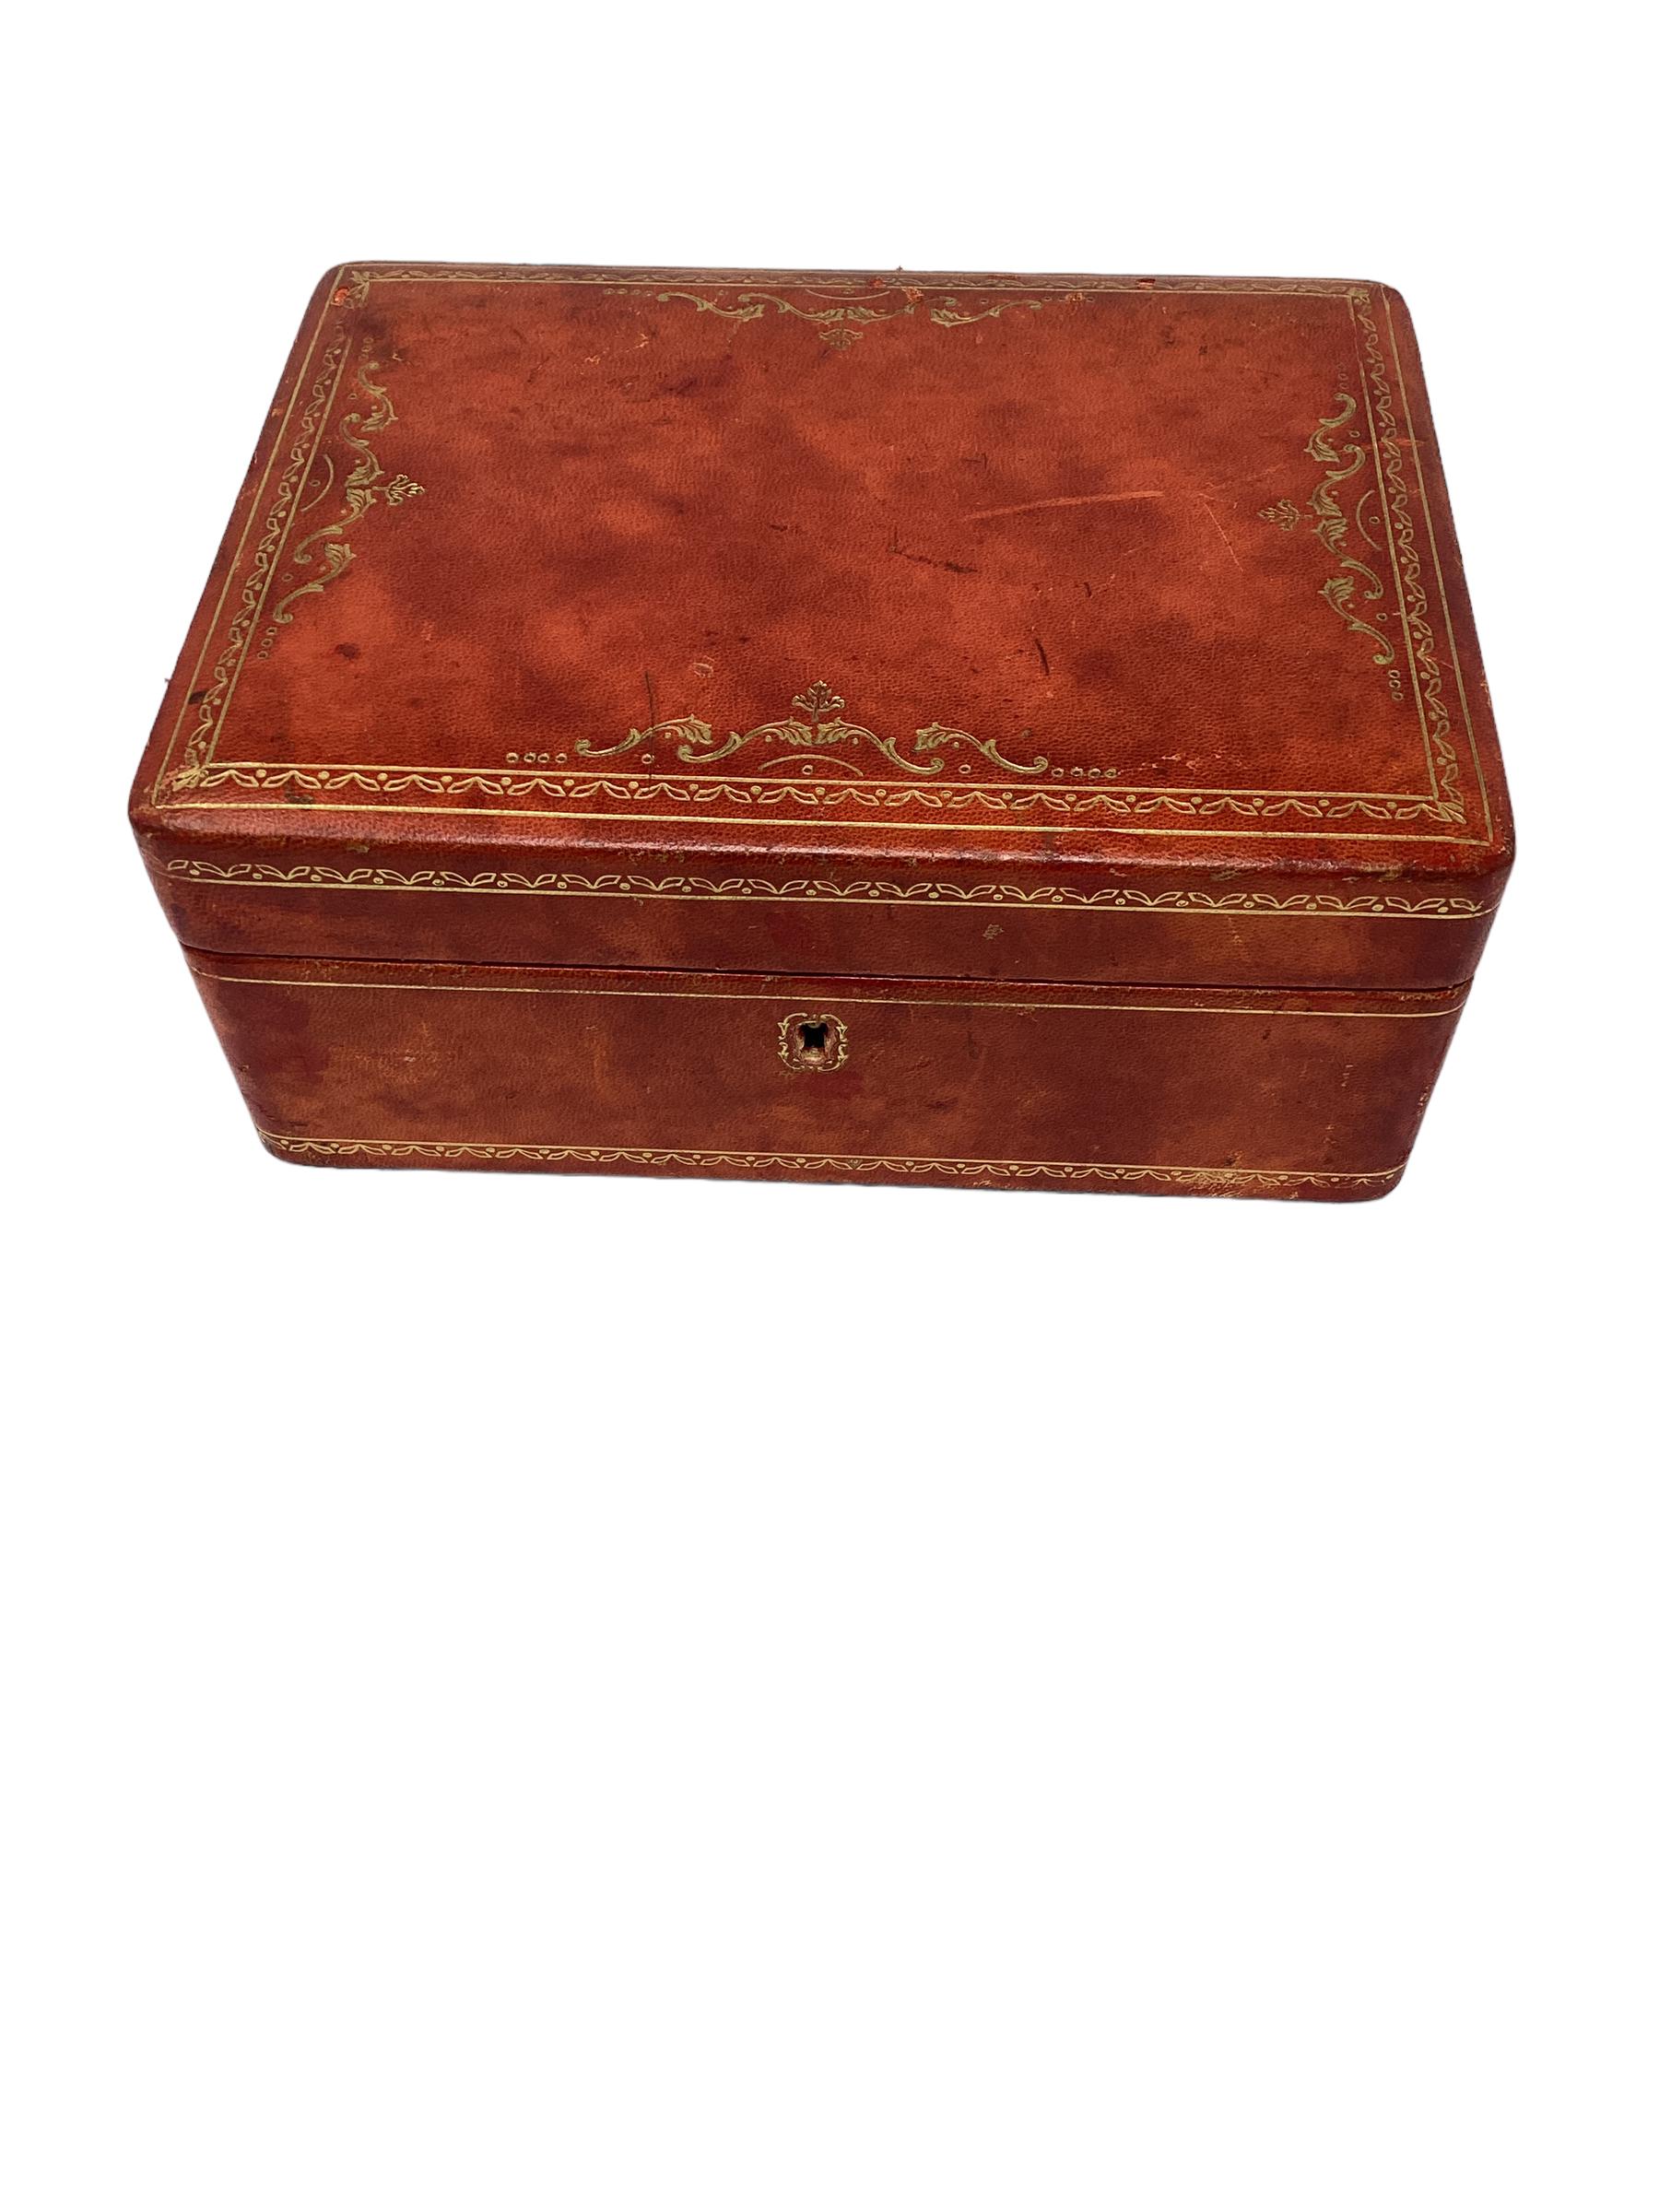 Italian Red Leather Jewelry Box with Gold Tooling. The top opens to reveal a red velvet lined interior. There is a tray that lifts out to reveal more storage and space to store rings. Leather shows wear as well as scuffs and markings.